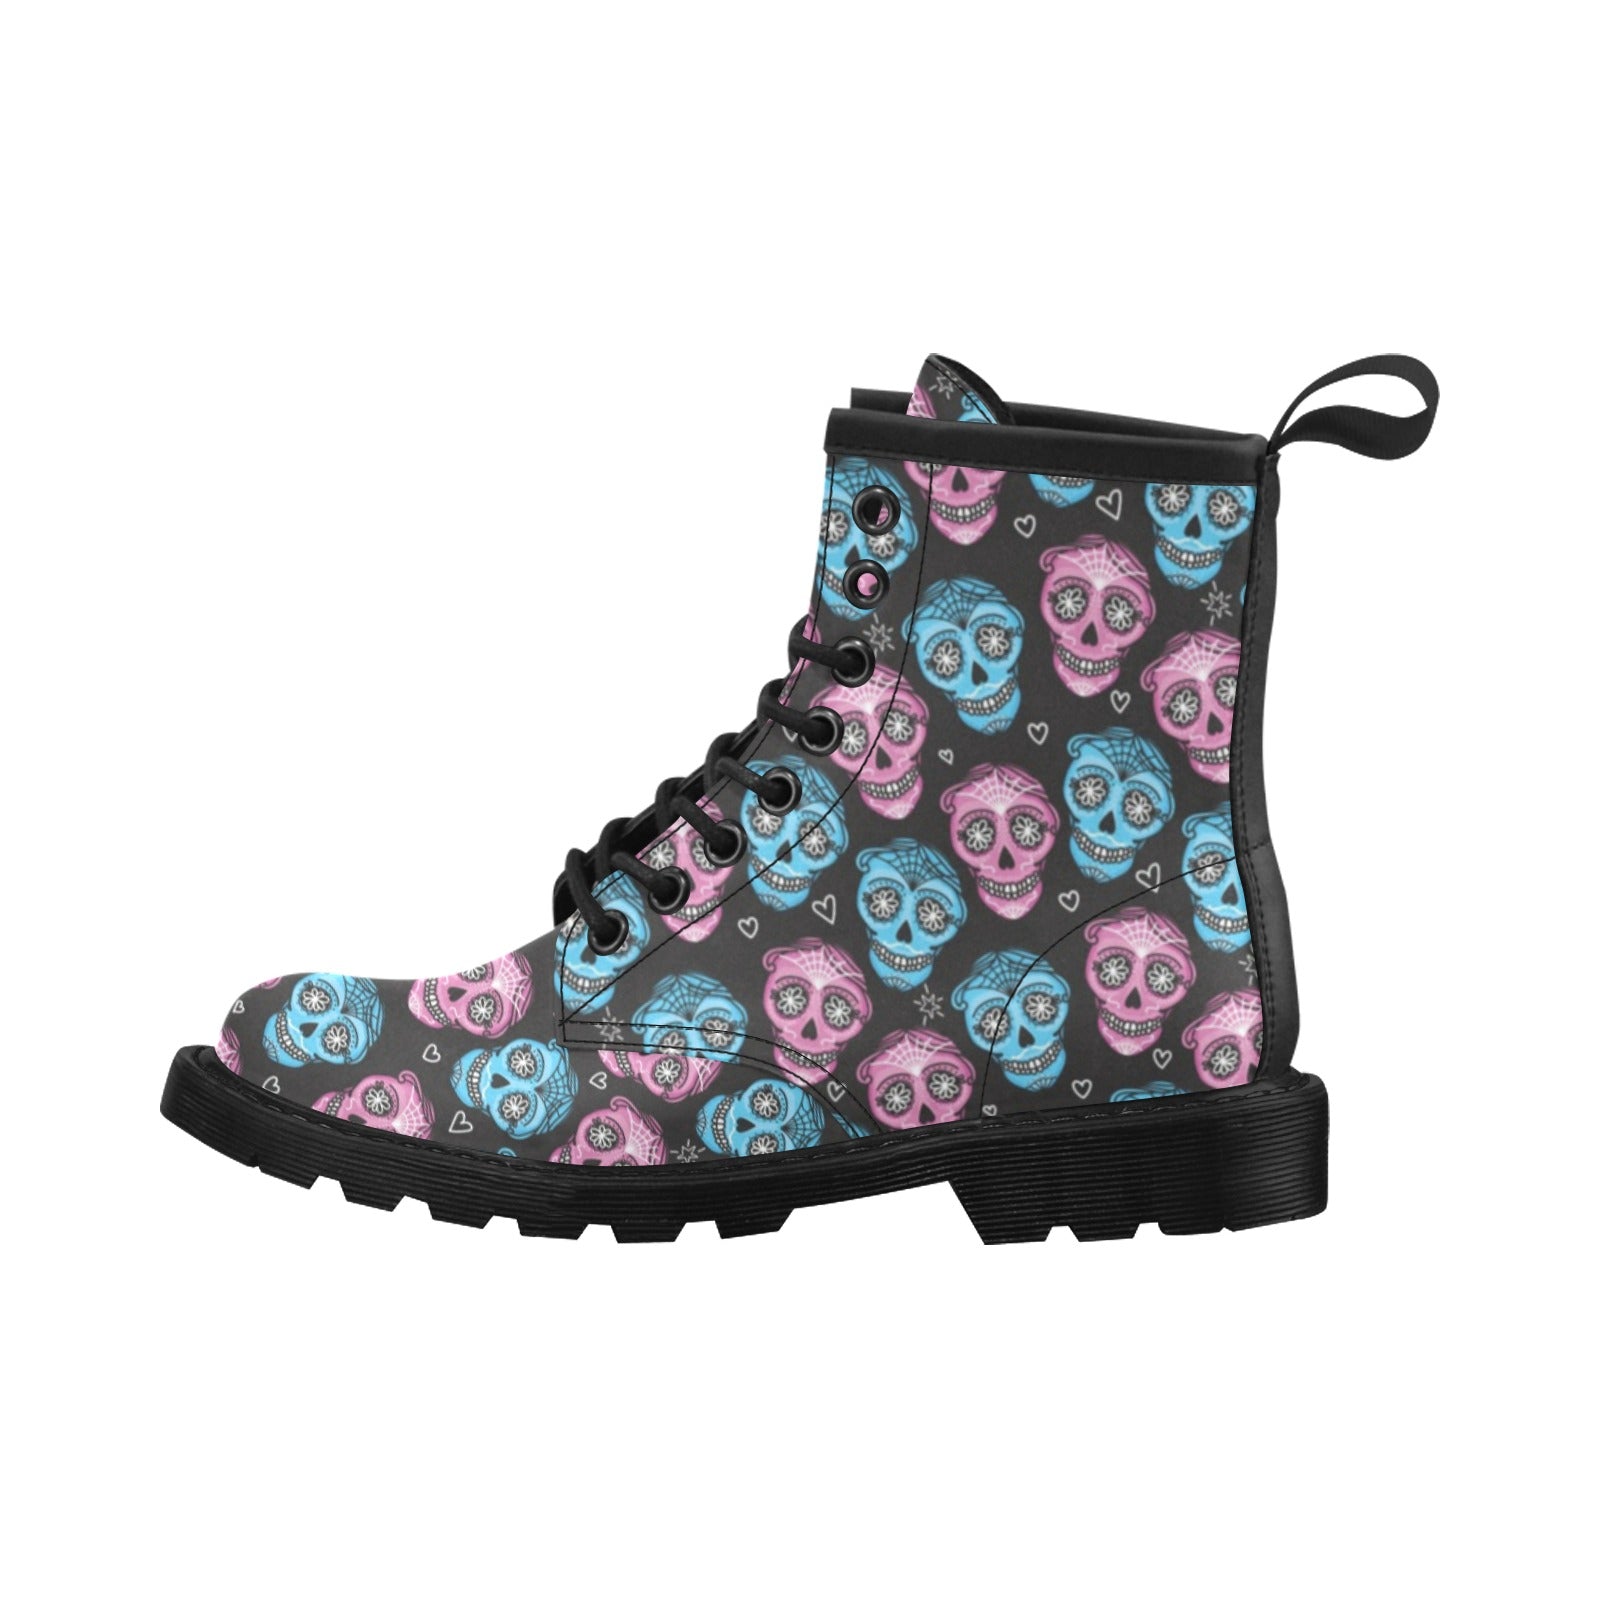 Day of the Dead Skull Print Pattern Women's Boots